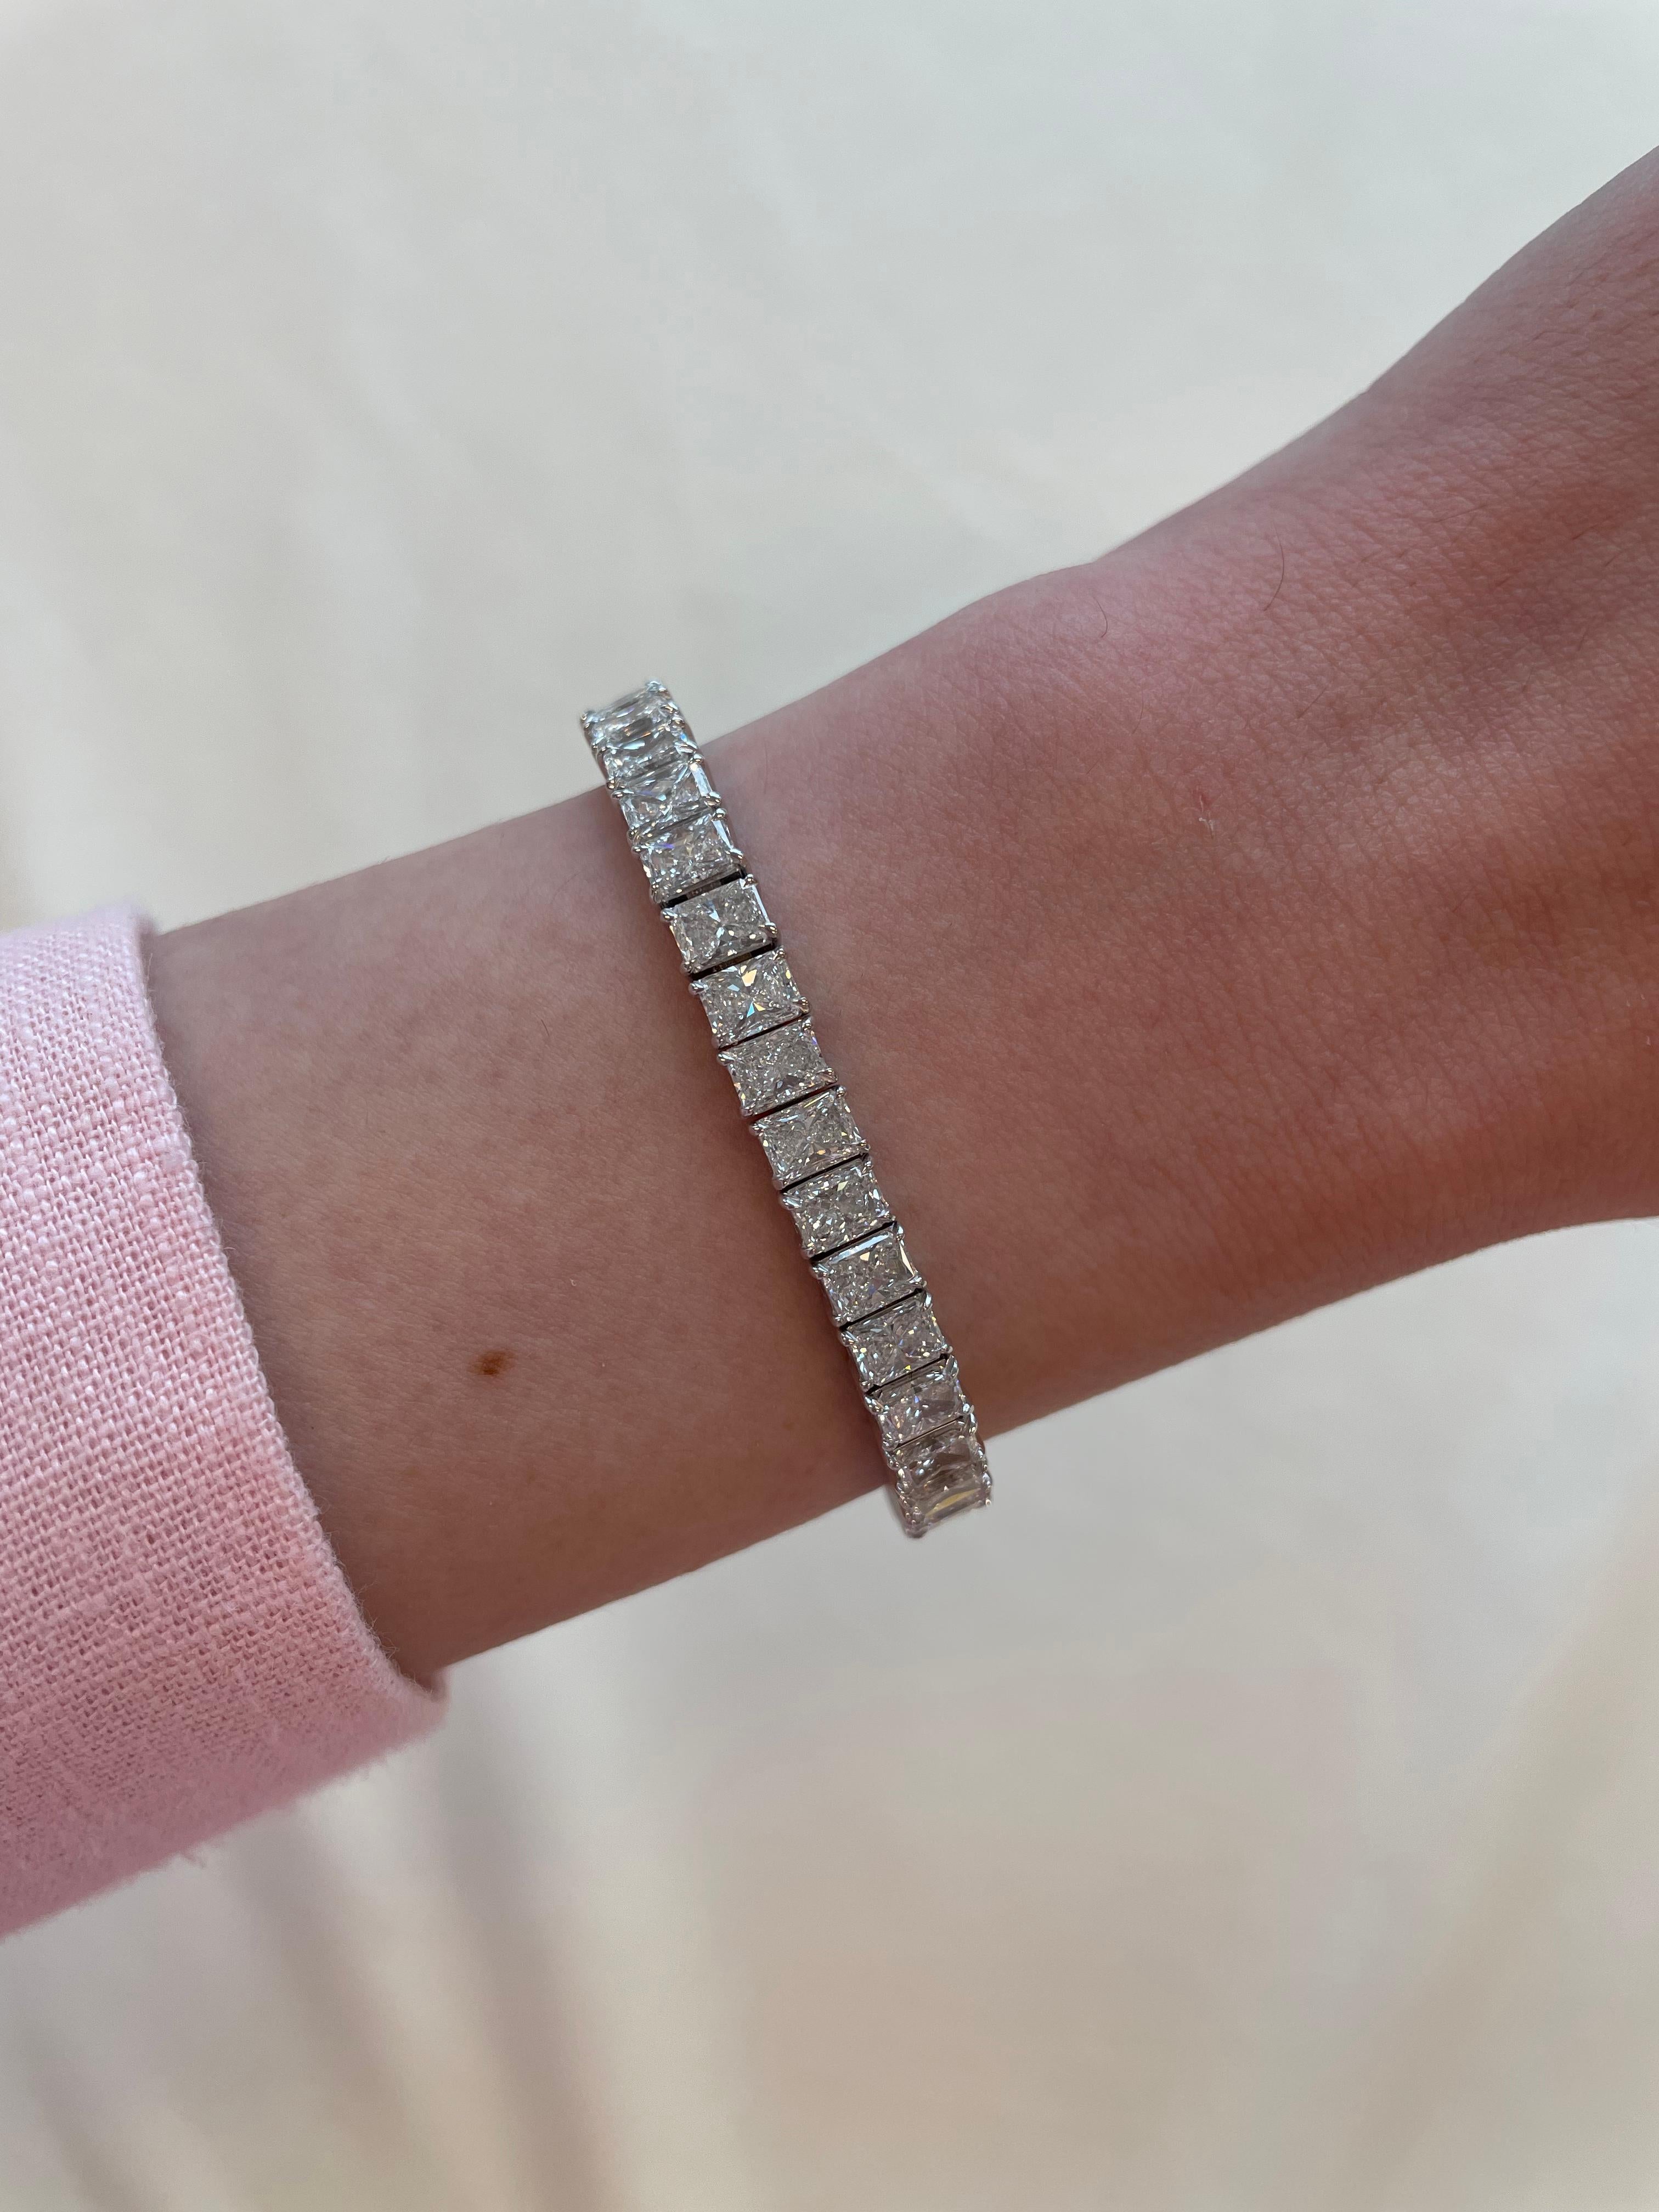 Stunning modern straight radiant cut diamond tennis bracelet. High jewelry by Alexander Beverly Hills.
46 radiant cut diamonds, 18.75 carats. Approximately E/F color and VVS clarity. 18k white gold, 24.49 grams.
Accommodated with an up to date